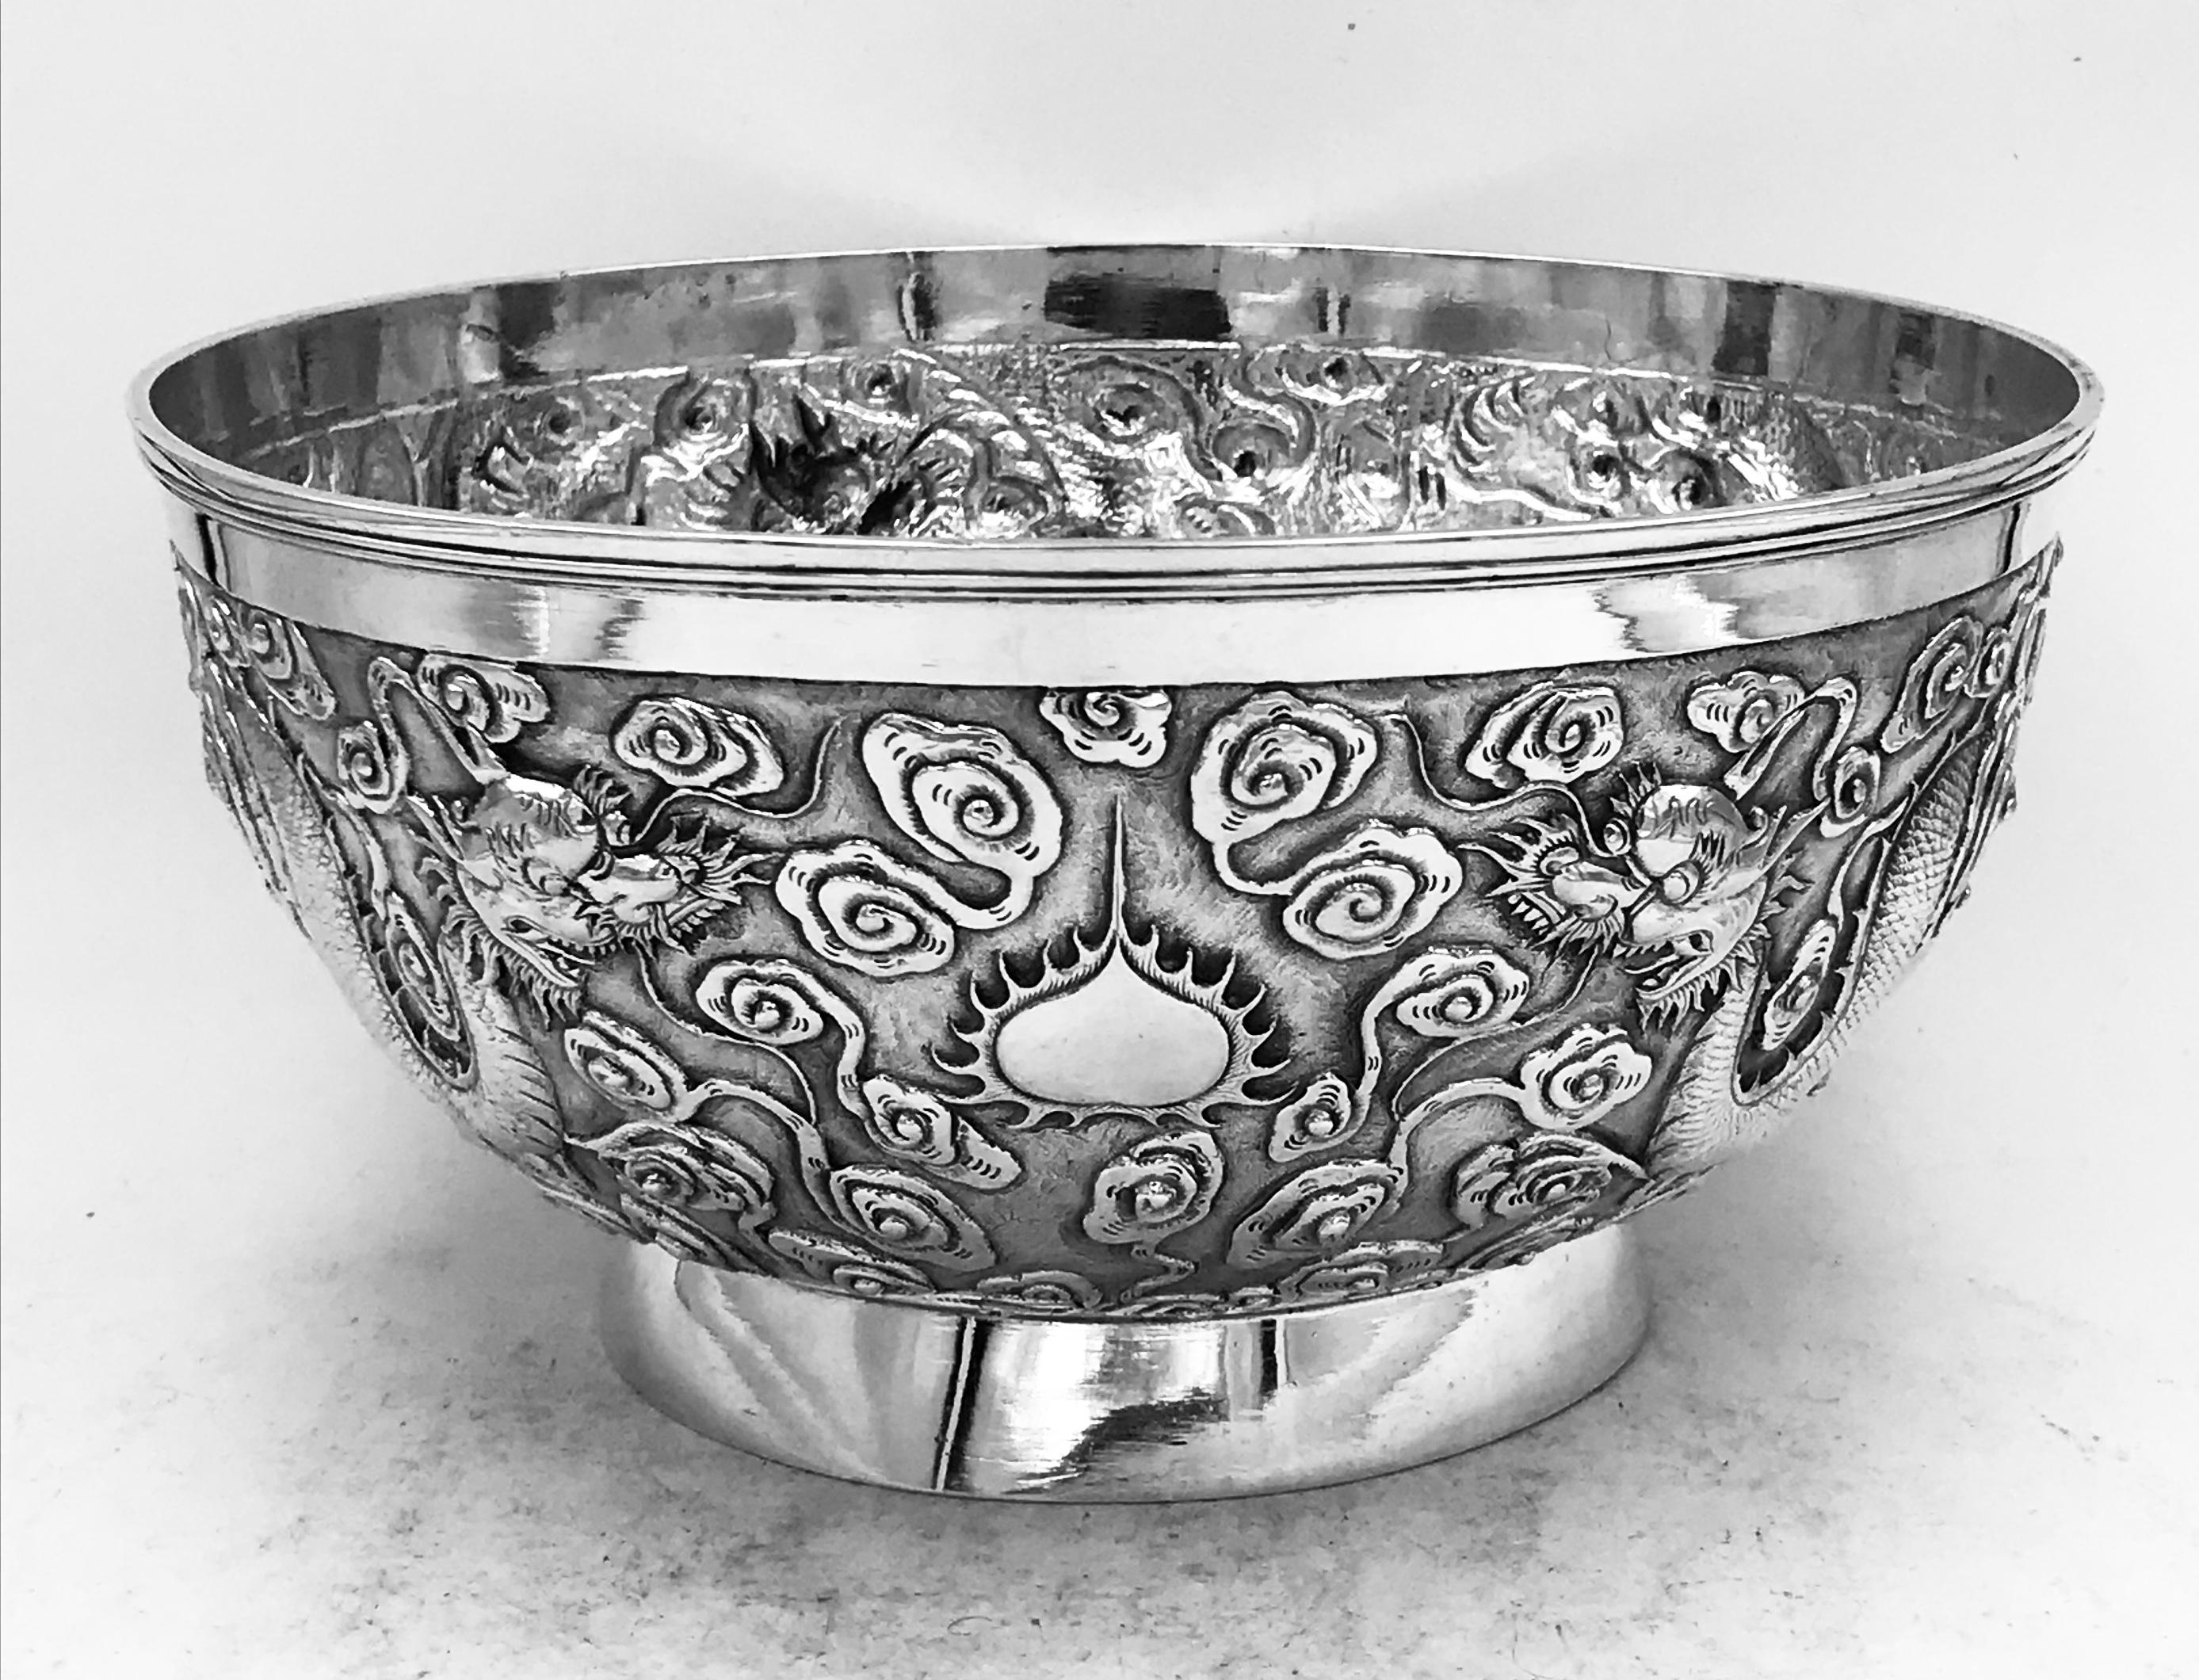 A Chinese export silver bowl, profusely decorated with dragons among clouds on a matte background. The bowl has a vacant cartouche, and is from Shanghai (上海) circa 1890. Marked by the maker '雄甡‘ (XiongShen), and the retailer 'Luen Wo' (联和).